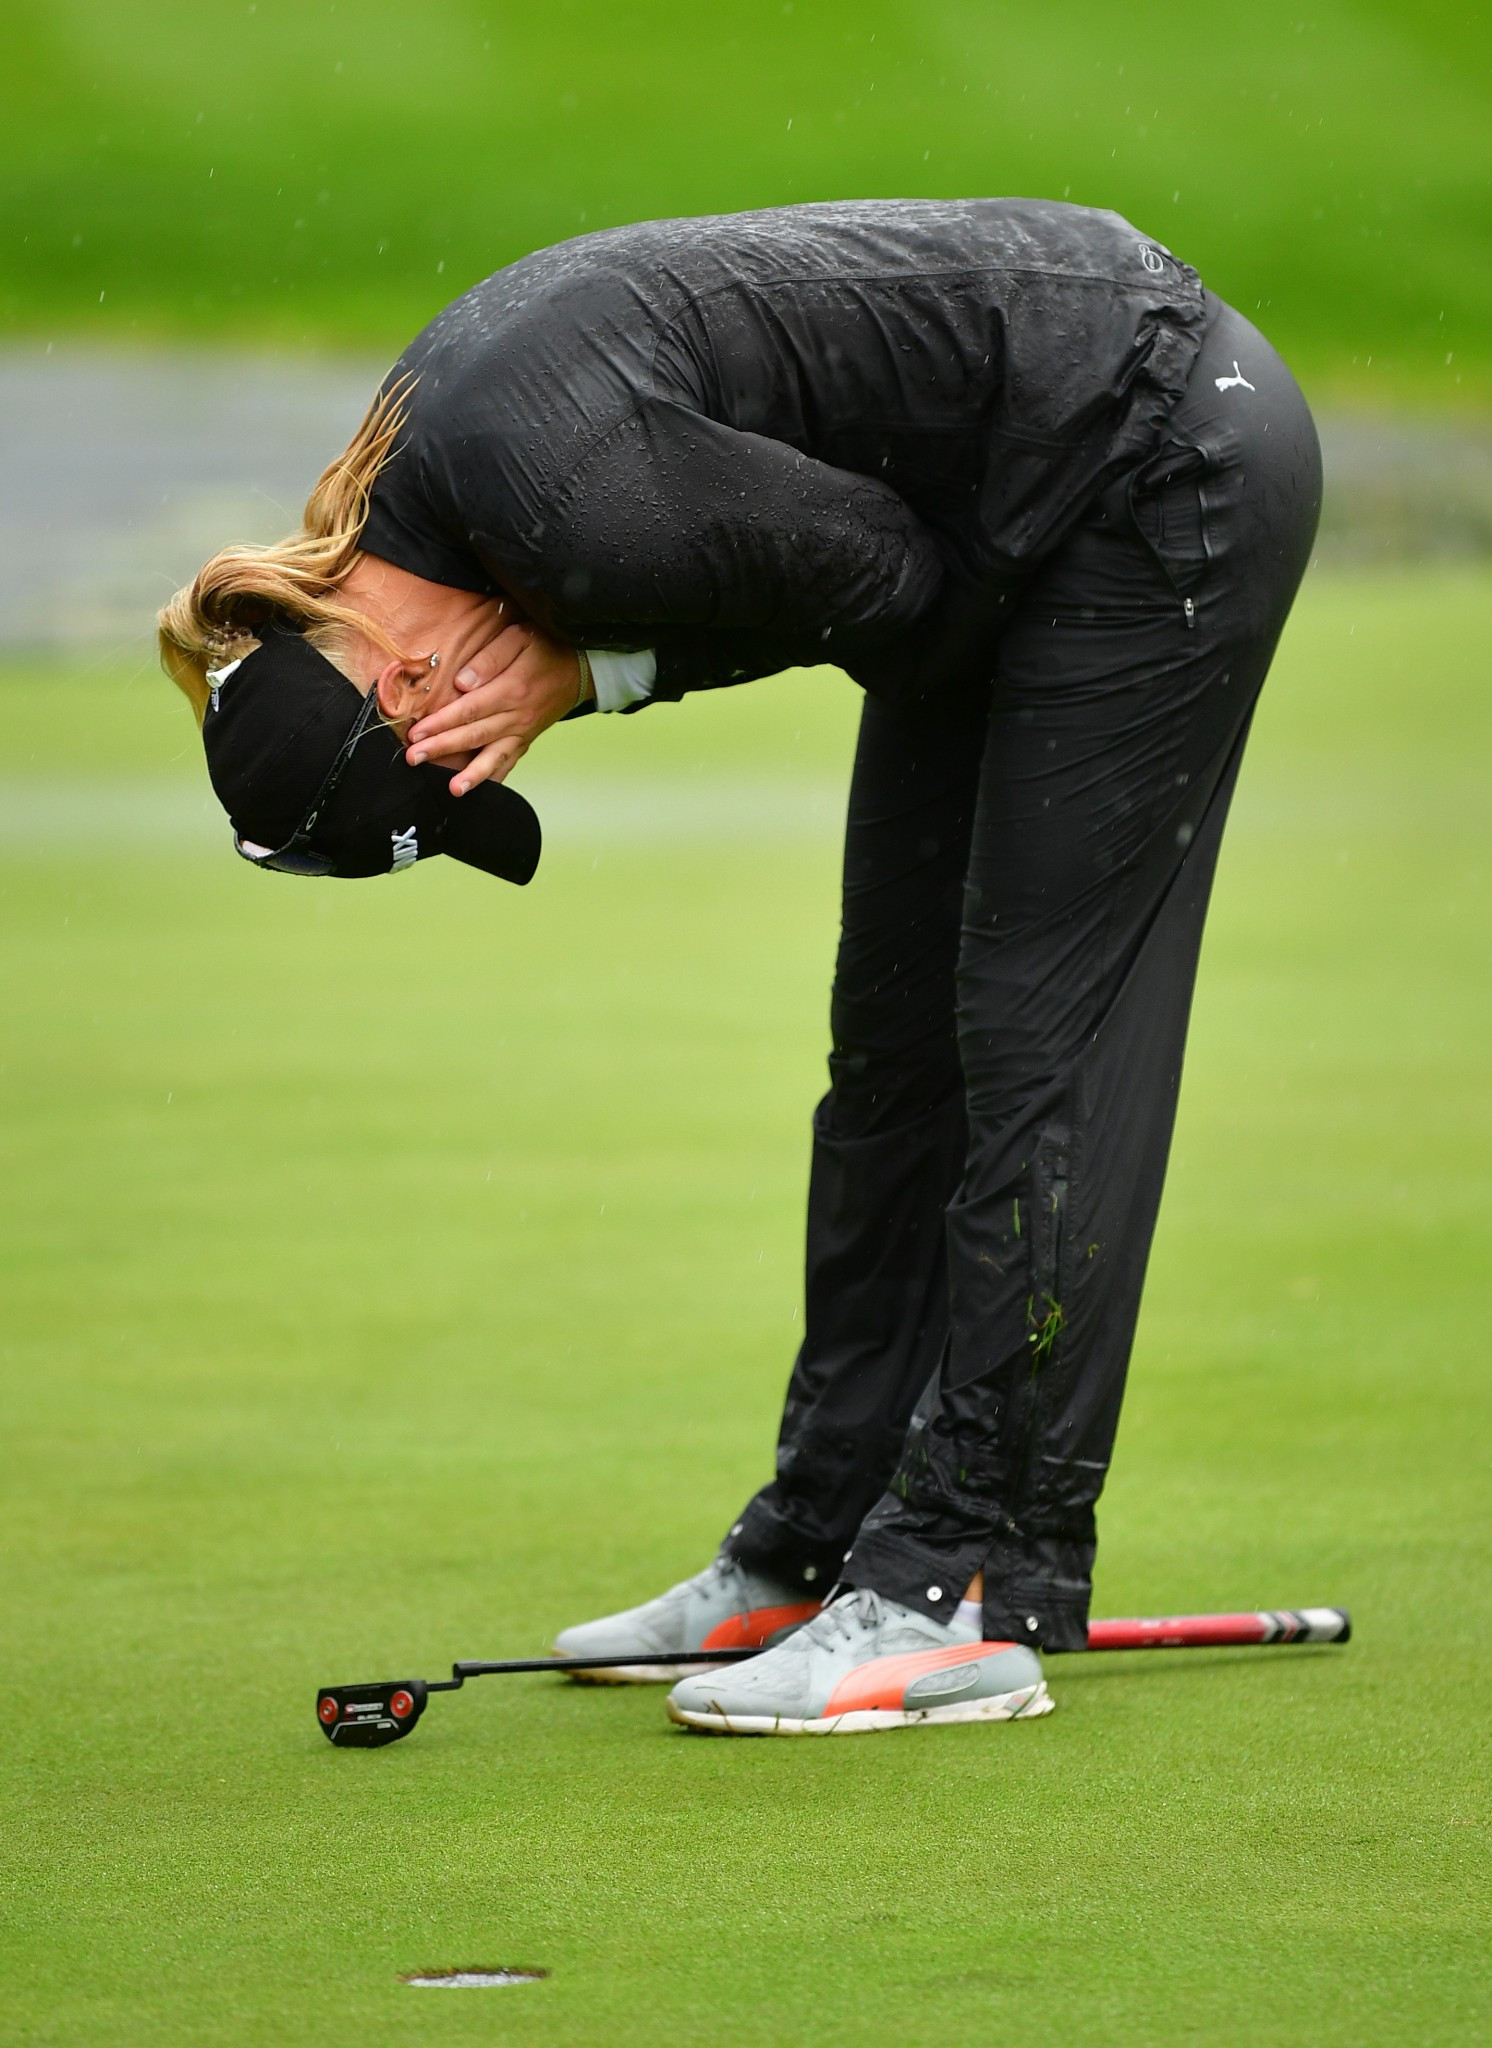 A rainswept Anna Nordqvist feels the force of her second major victory on the LPGA European Tour in eight years after holing at the first extra hole of her play-off against Britanny Altomare of the United States to win the Evian Championship ©Getty Images